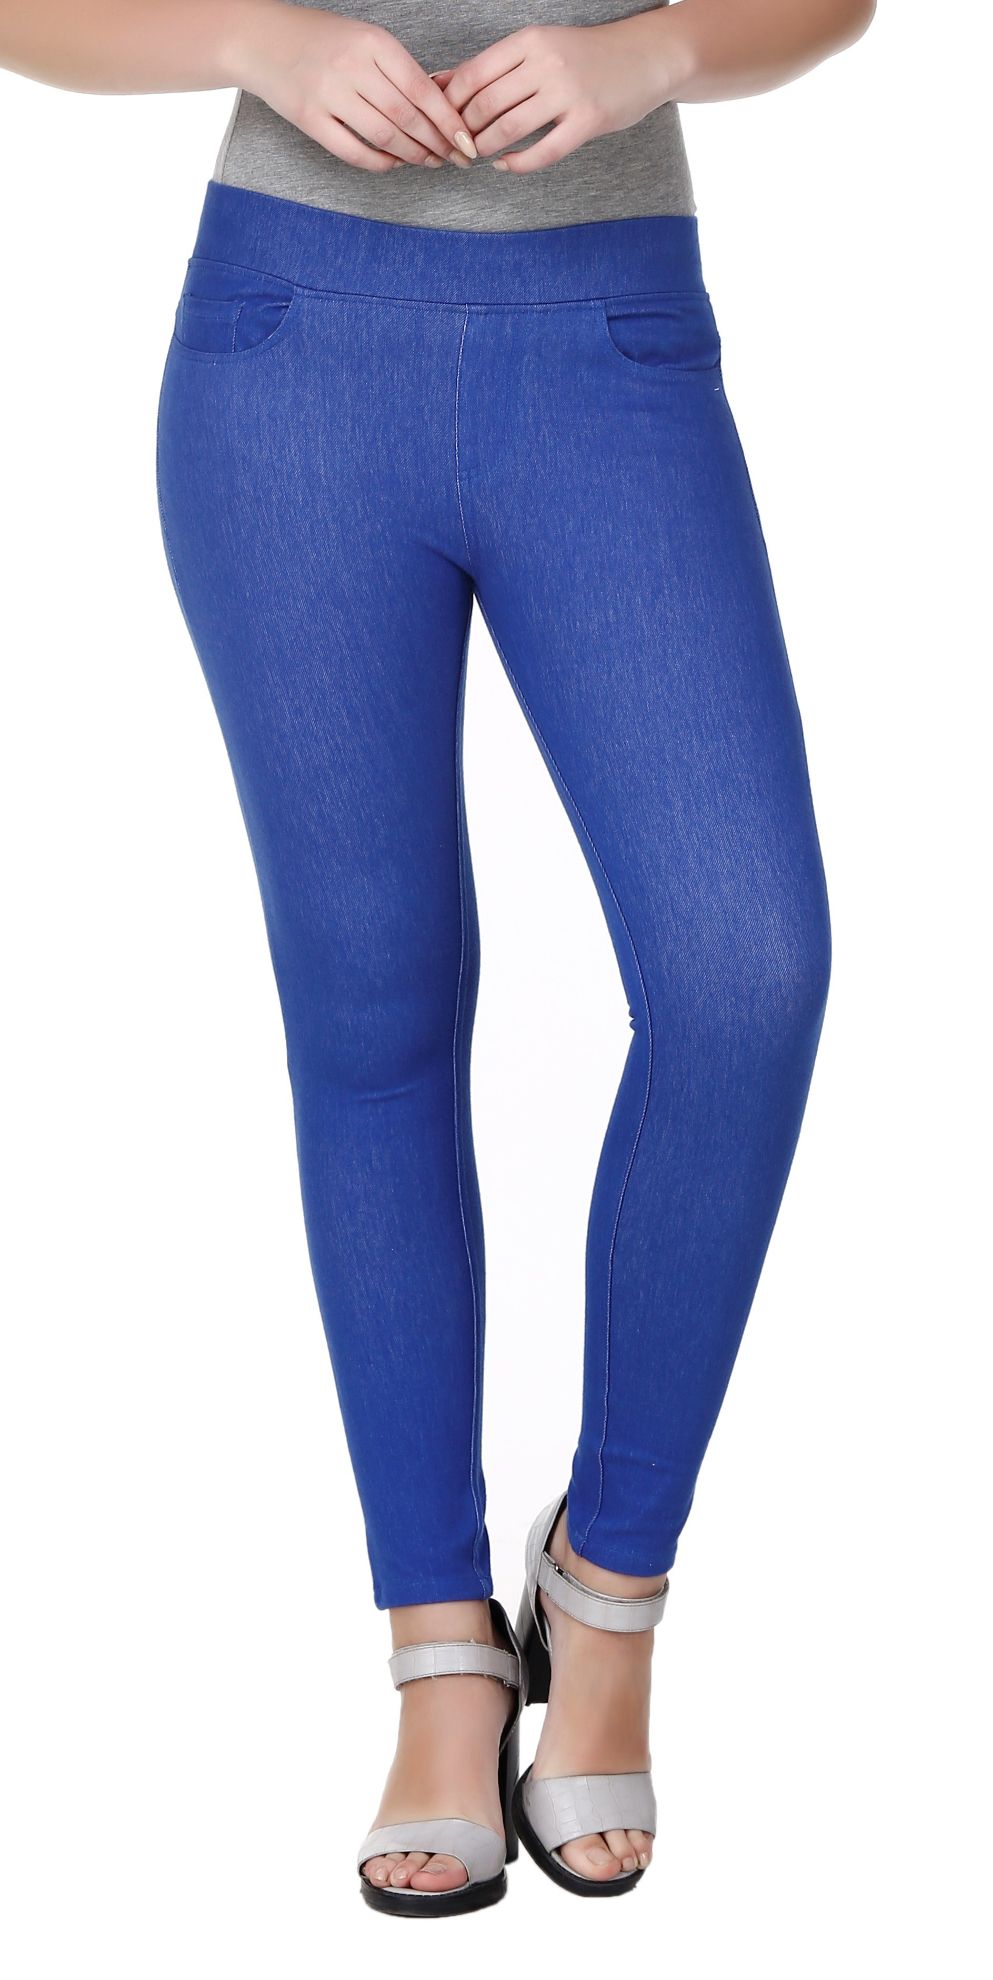 https://frenchtrendz.com/images/thumbs/0005400_frenchtrendz-cotton-viscose-spandex-royal-blue-jeggings.jpeg